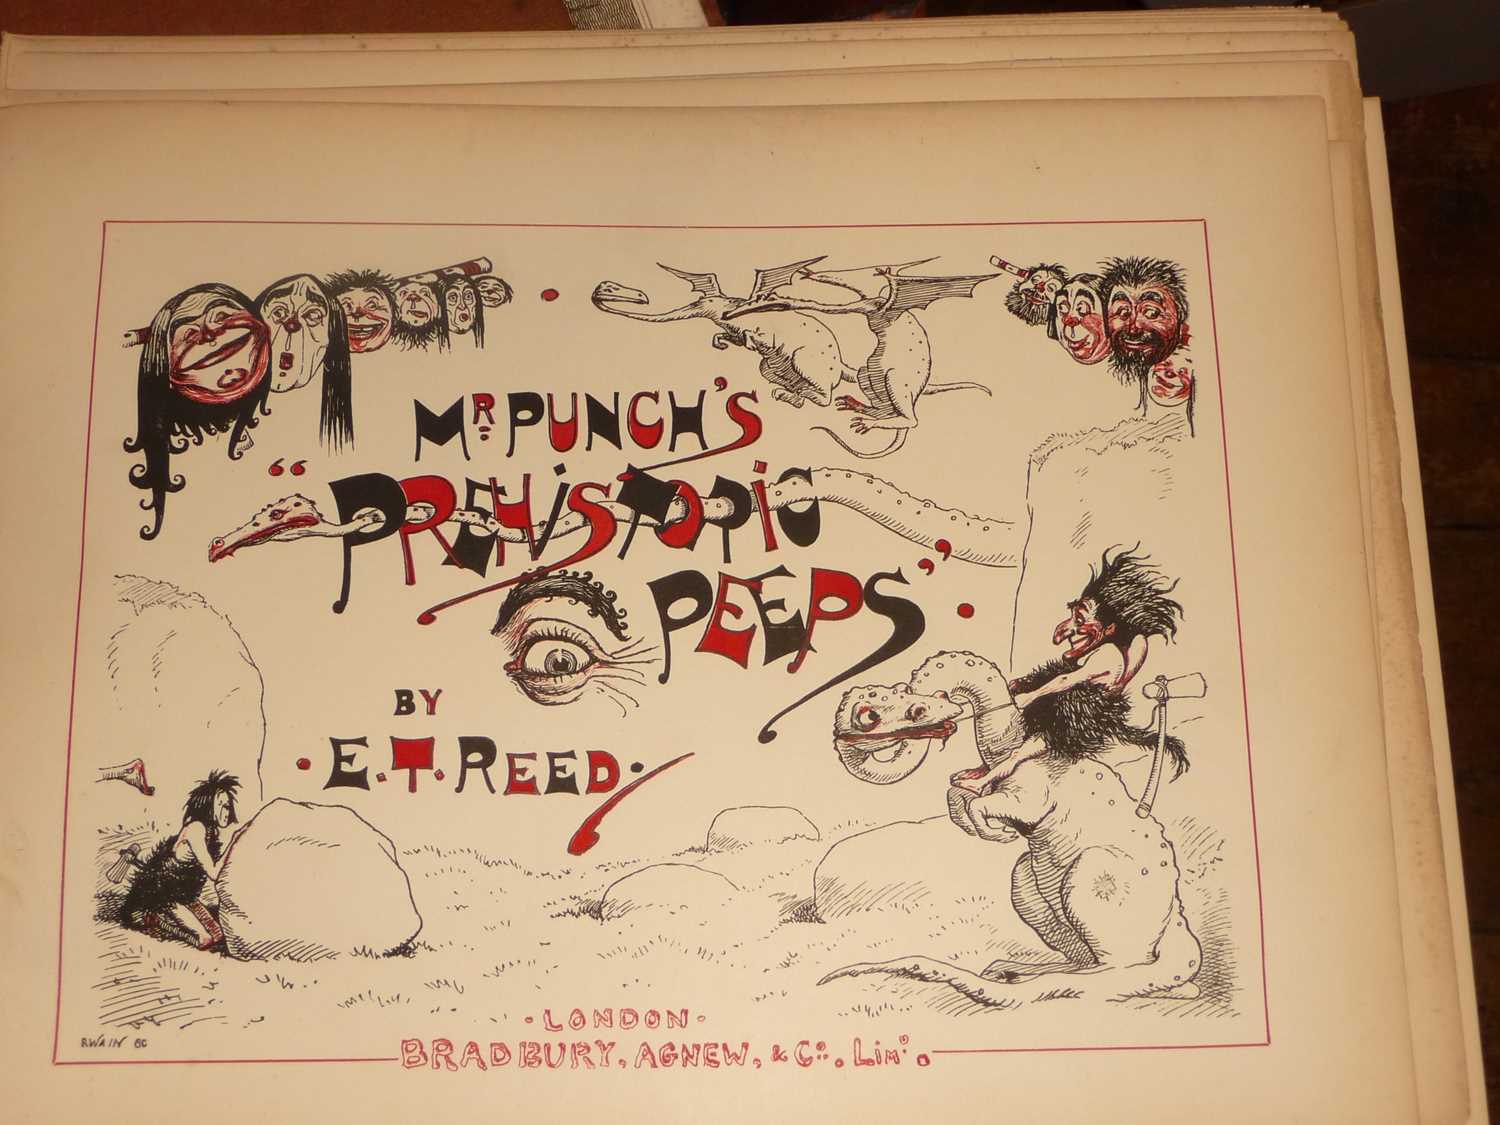 Skelton's Etchings of the Antiquities of Bristol and 19th c. Mr. Punch's Prehistoric Peeps books, - Image 4 of 6